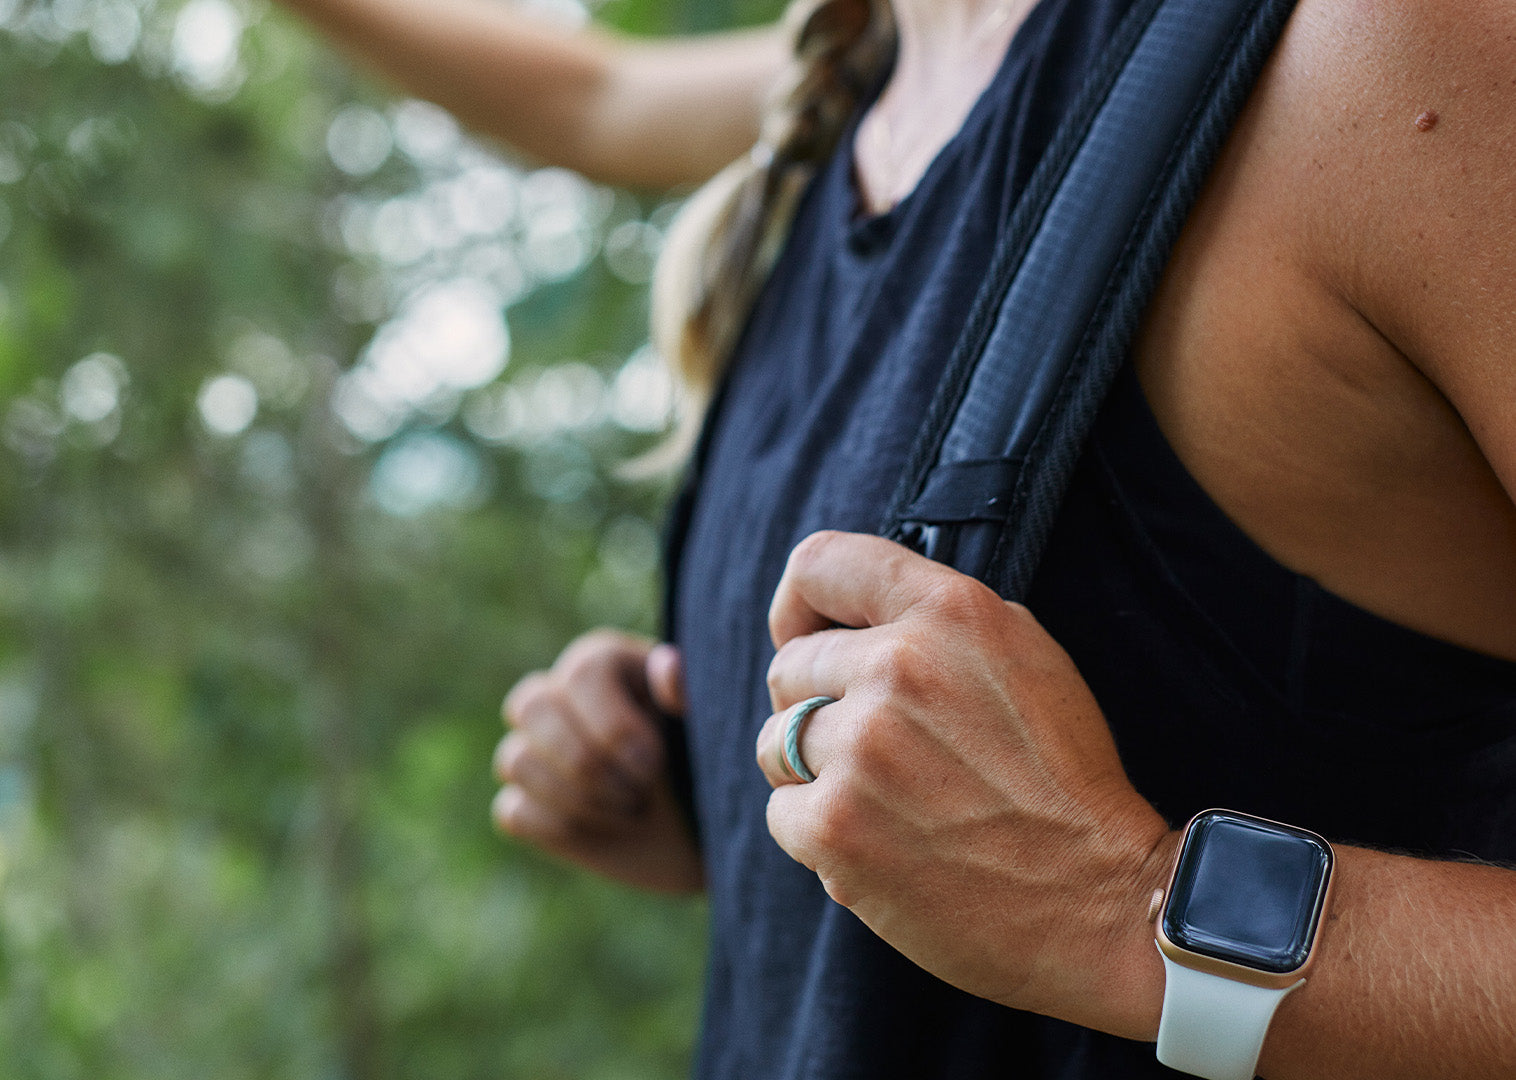 woman wearing a backpack holding the straps and featuring a Groove Life Apple watch band